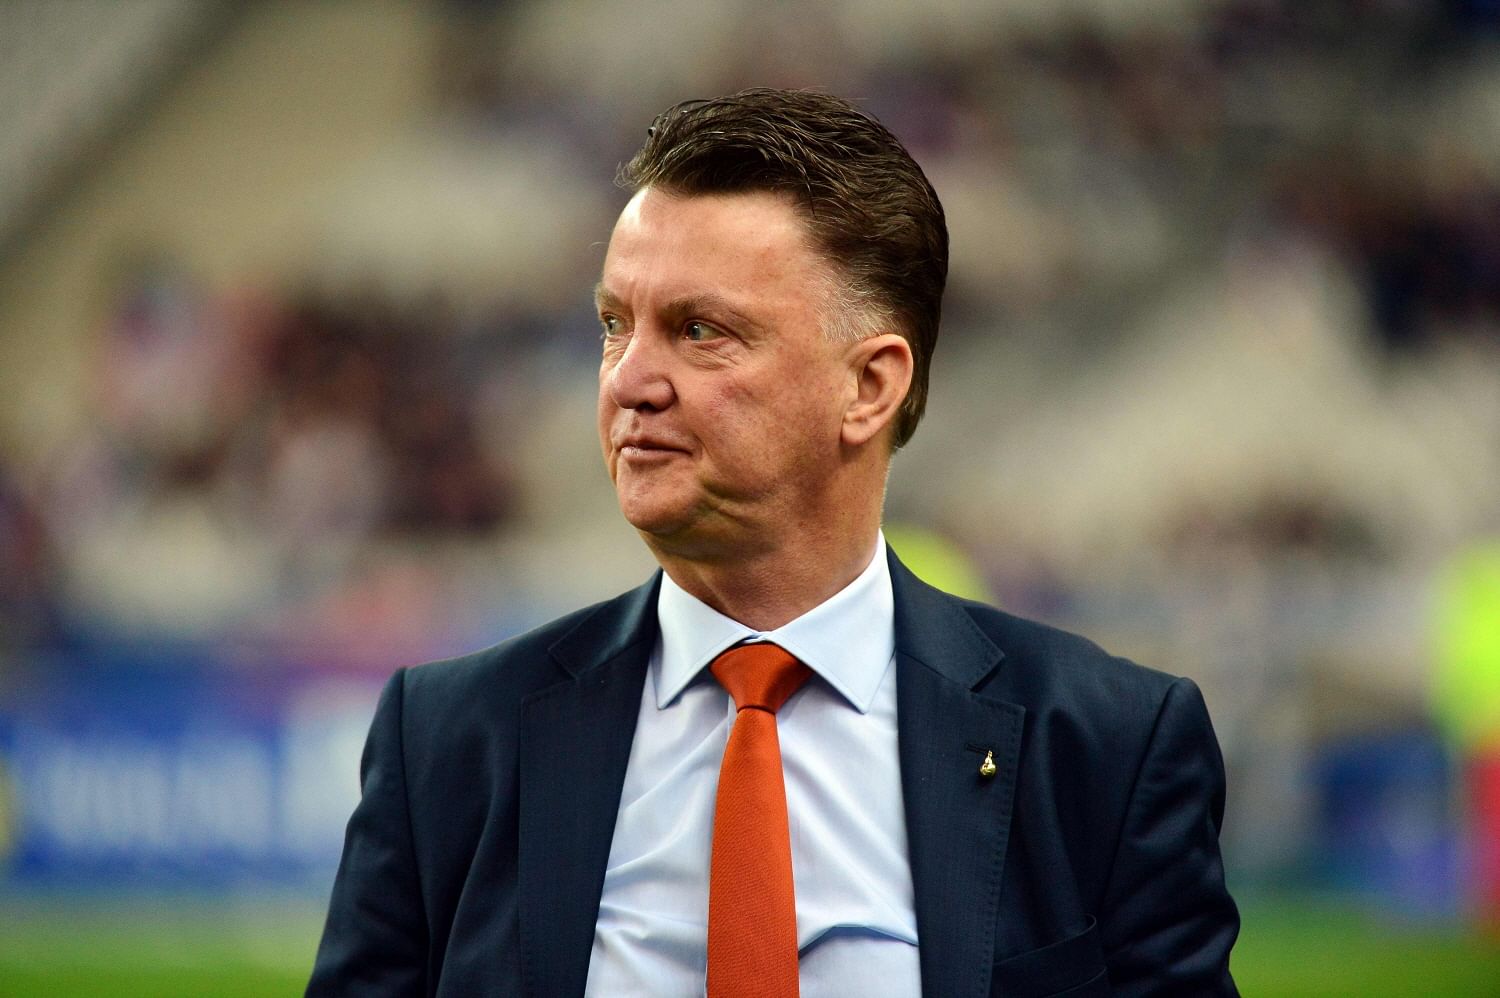 Van Gaal refuses to comment on Chicharito's future